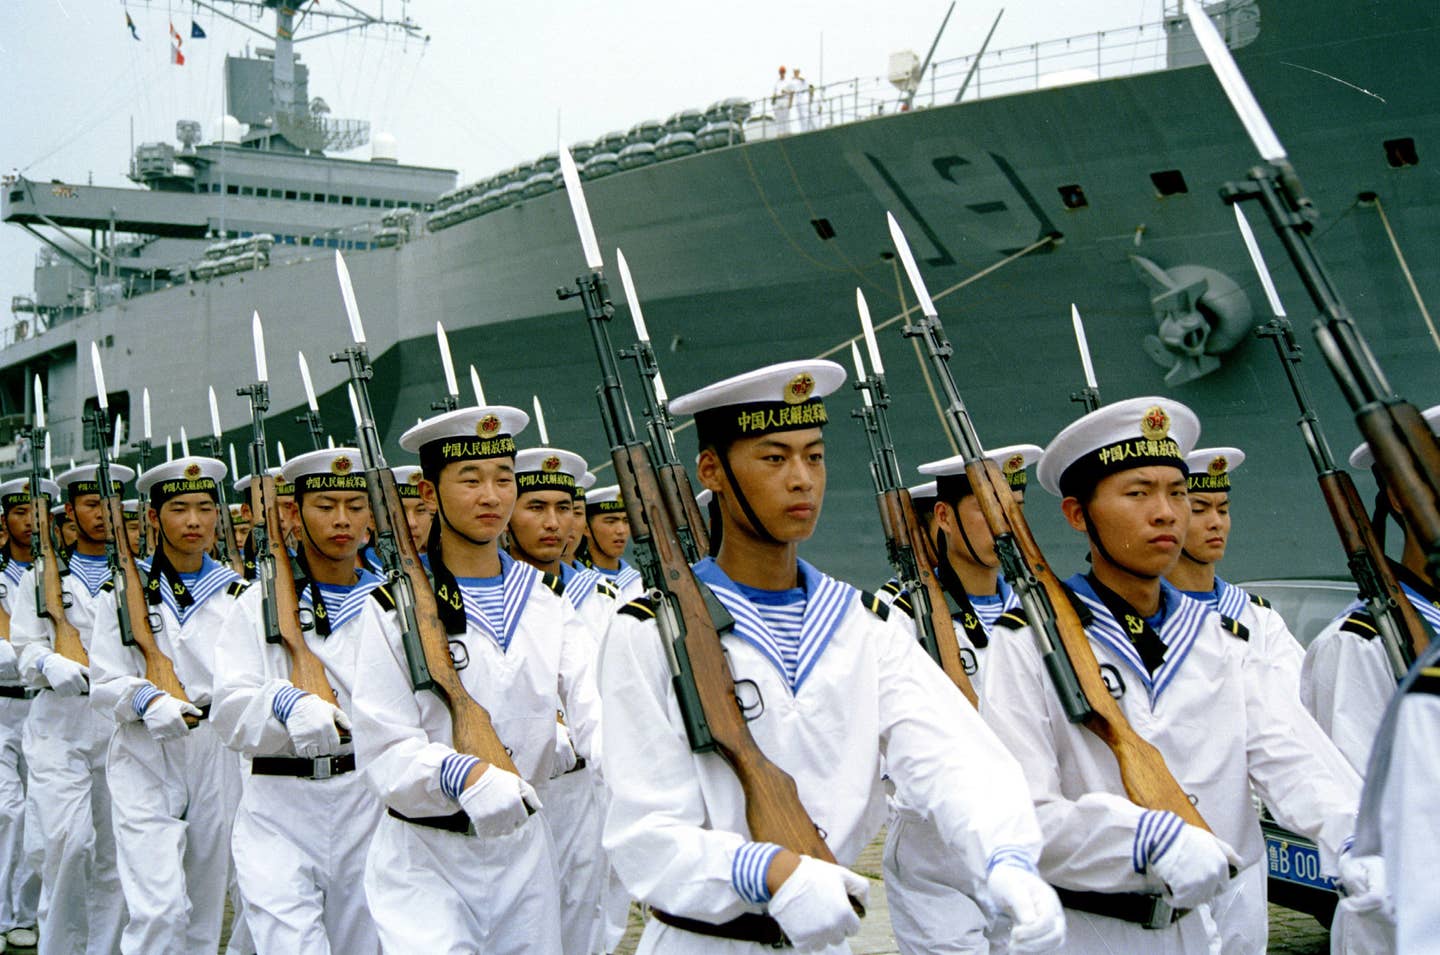 chinese navy with sks rifles that were AK-47 predecessor